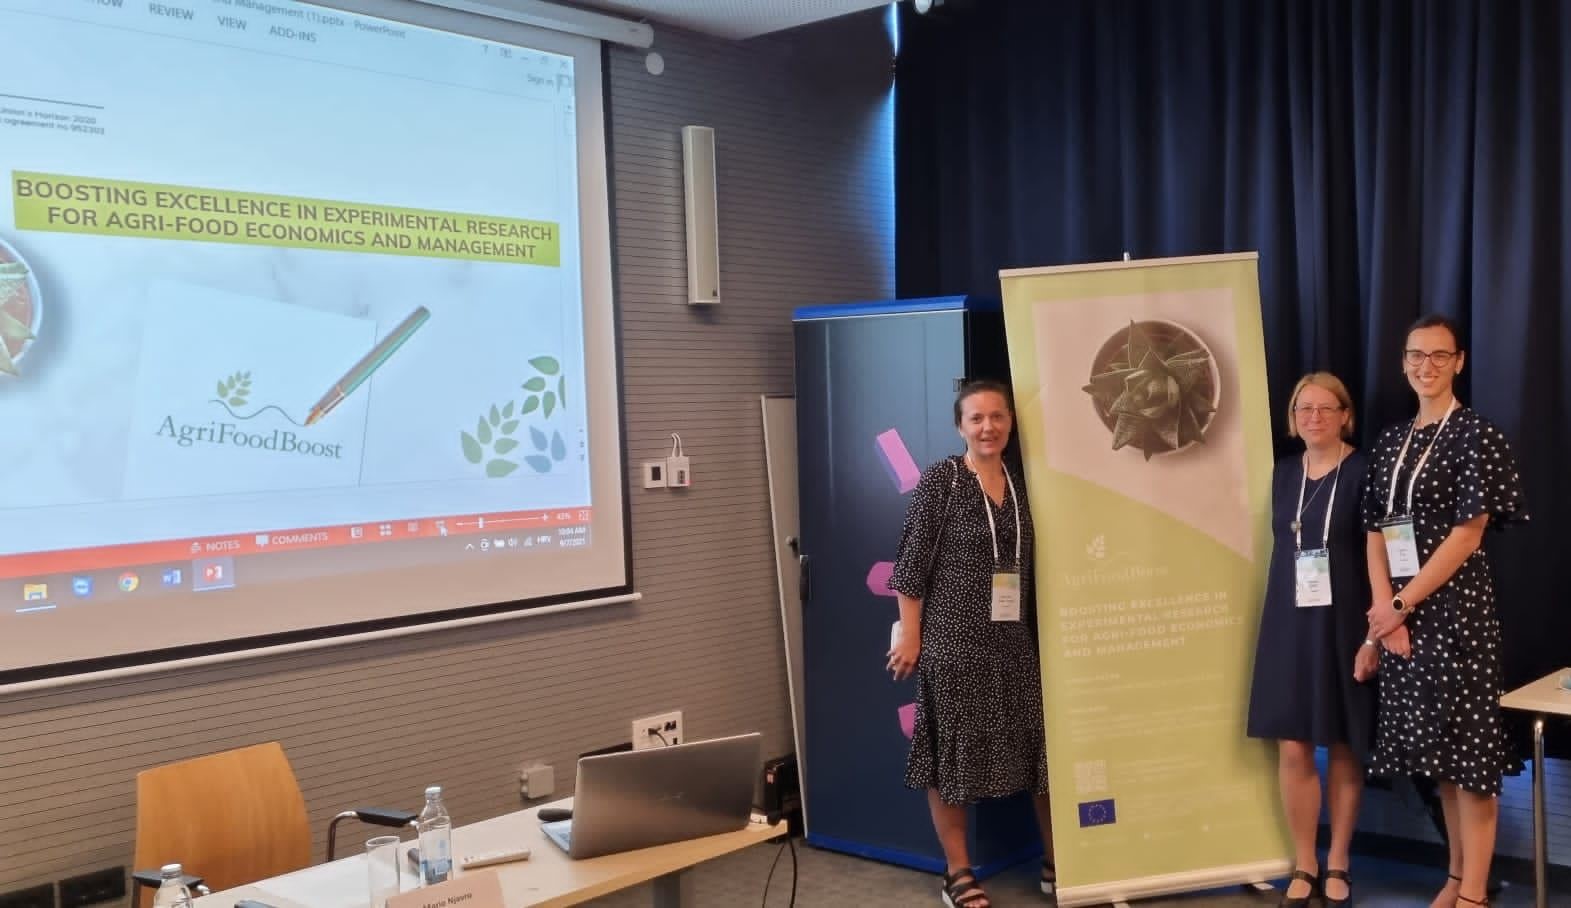 AgriFoodBoost project was presented at the 56th Croatian & 16th International Symposium on Agriculture